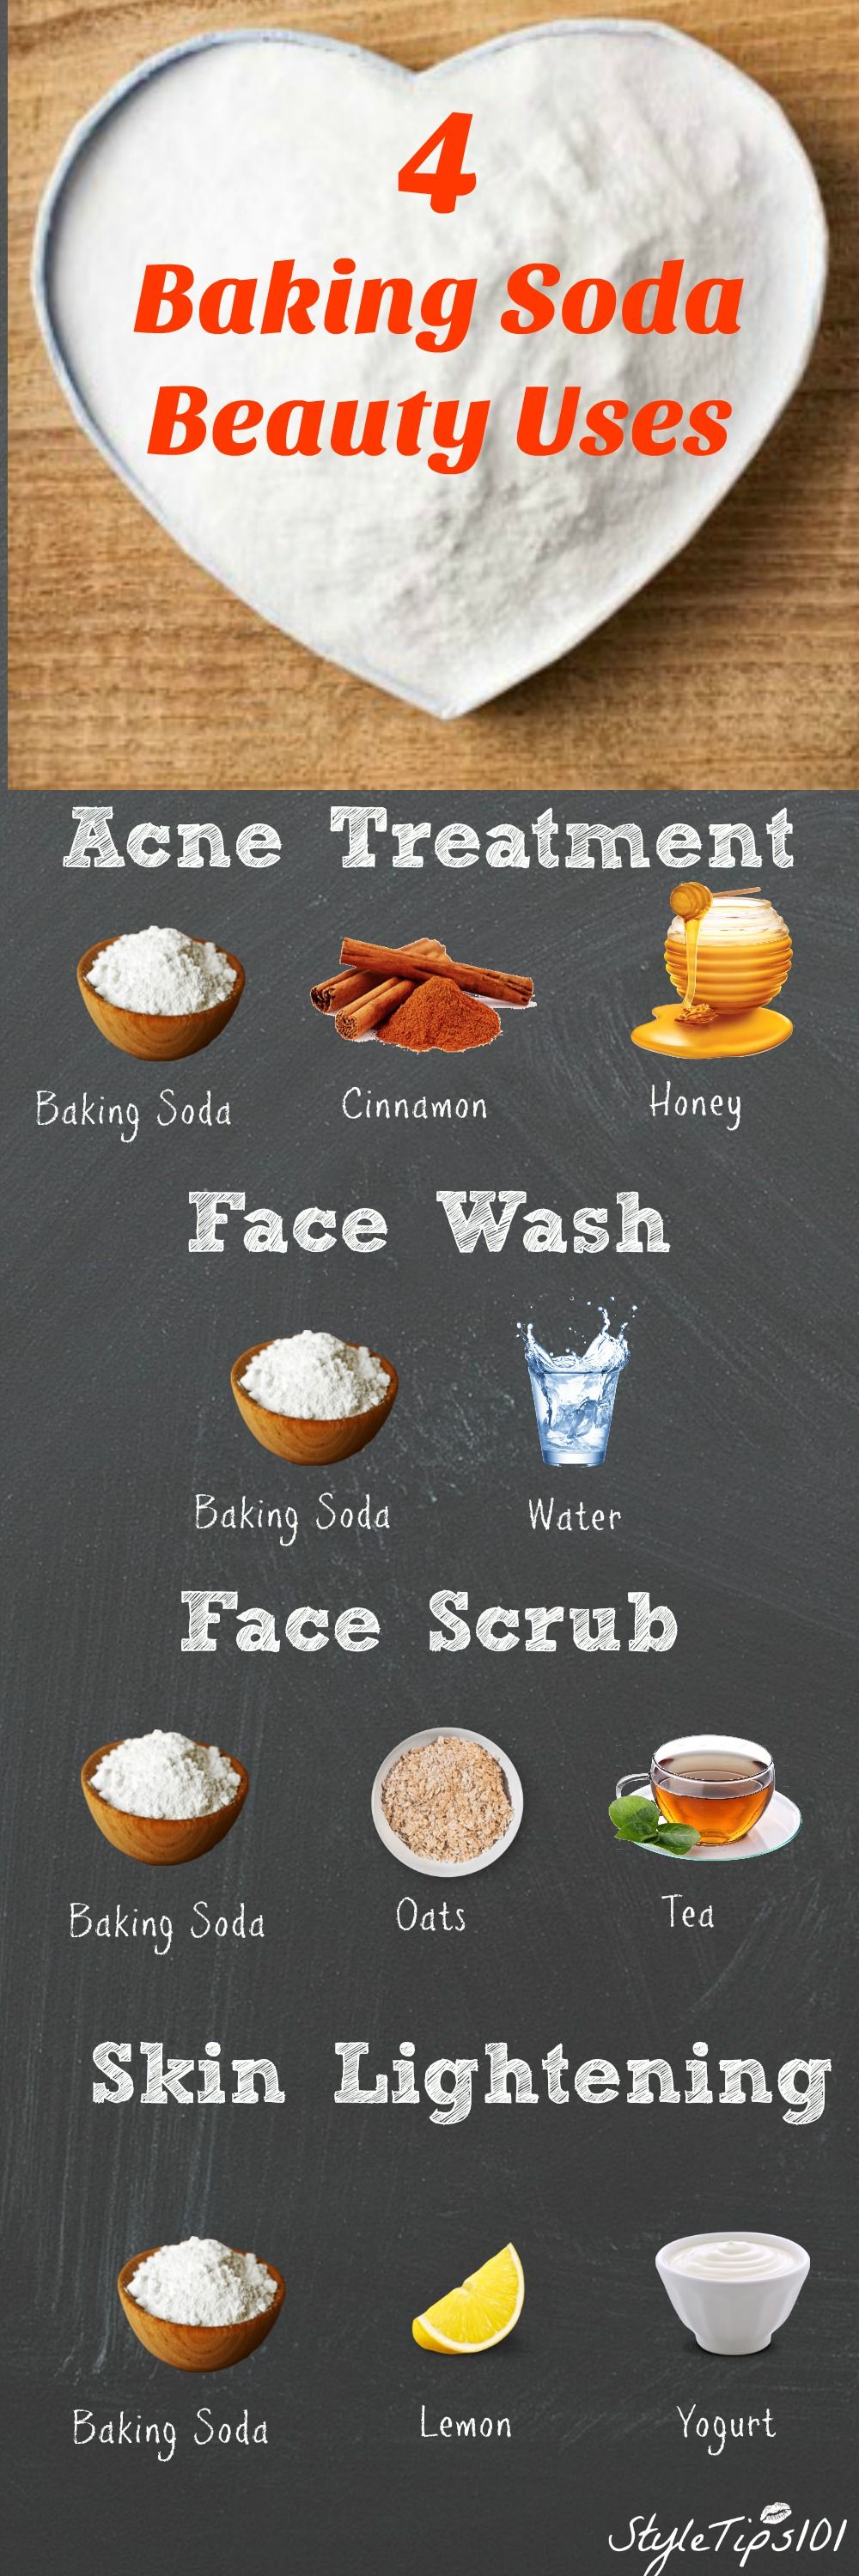 4 Amazing Baking Soda Beauty Uses You Need To Know About Infographic